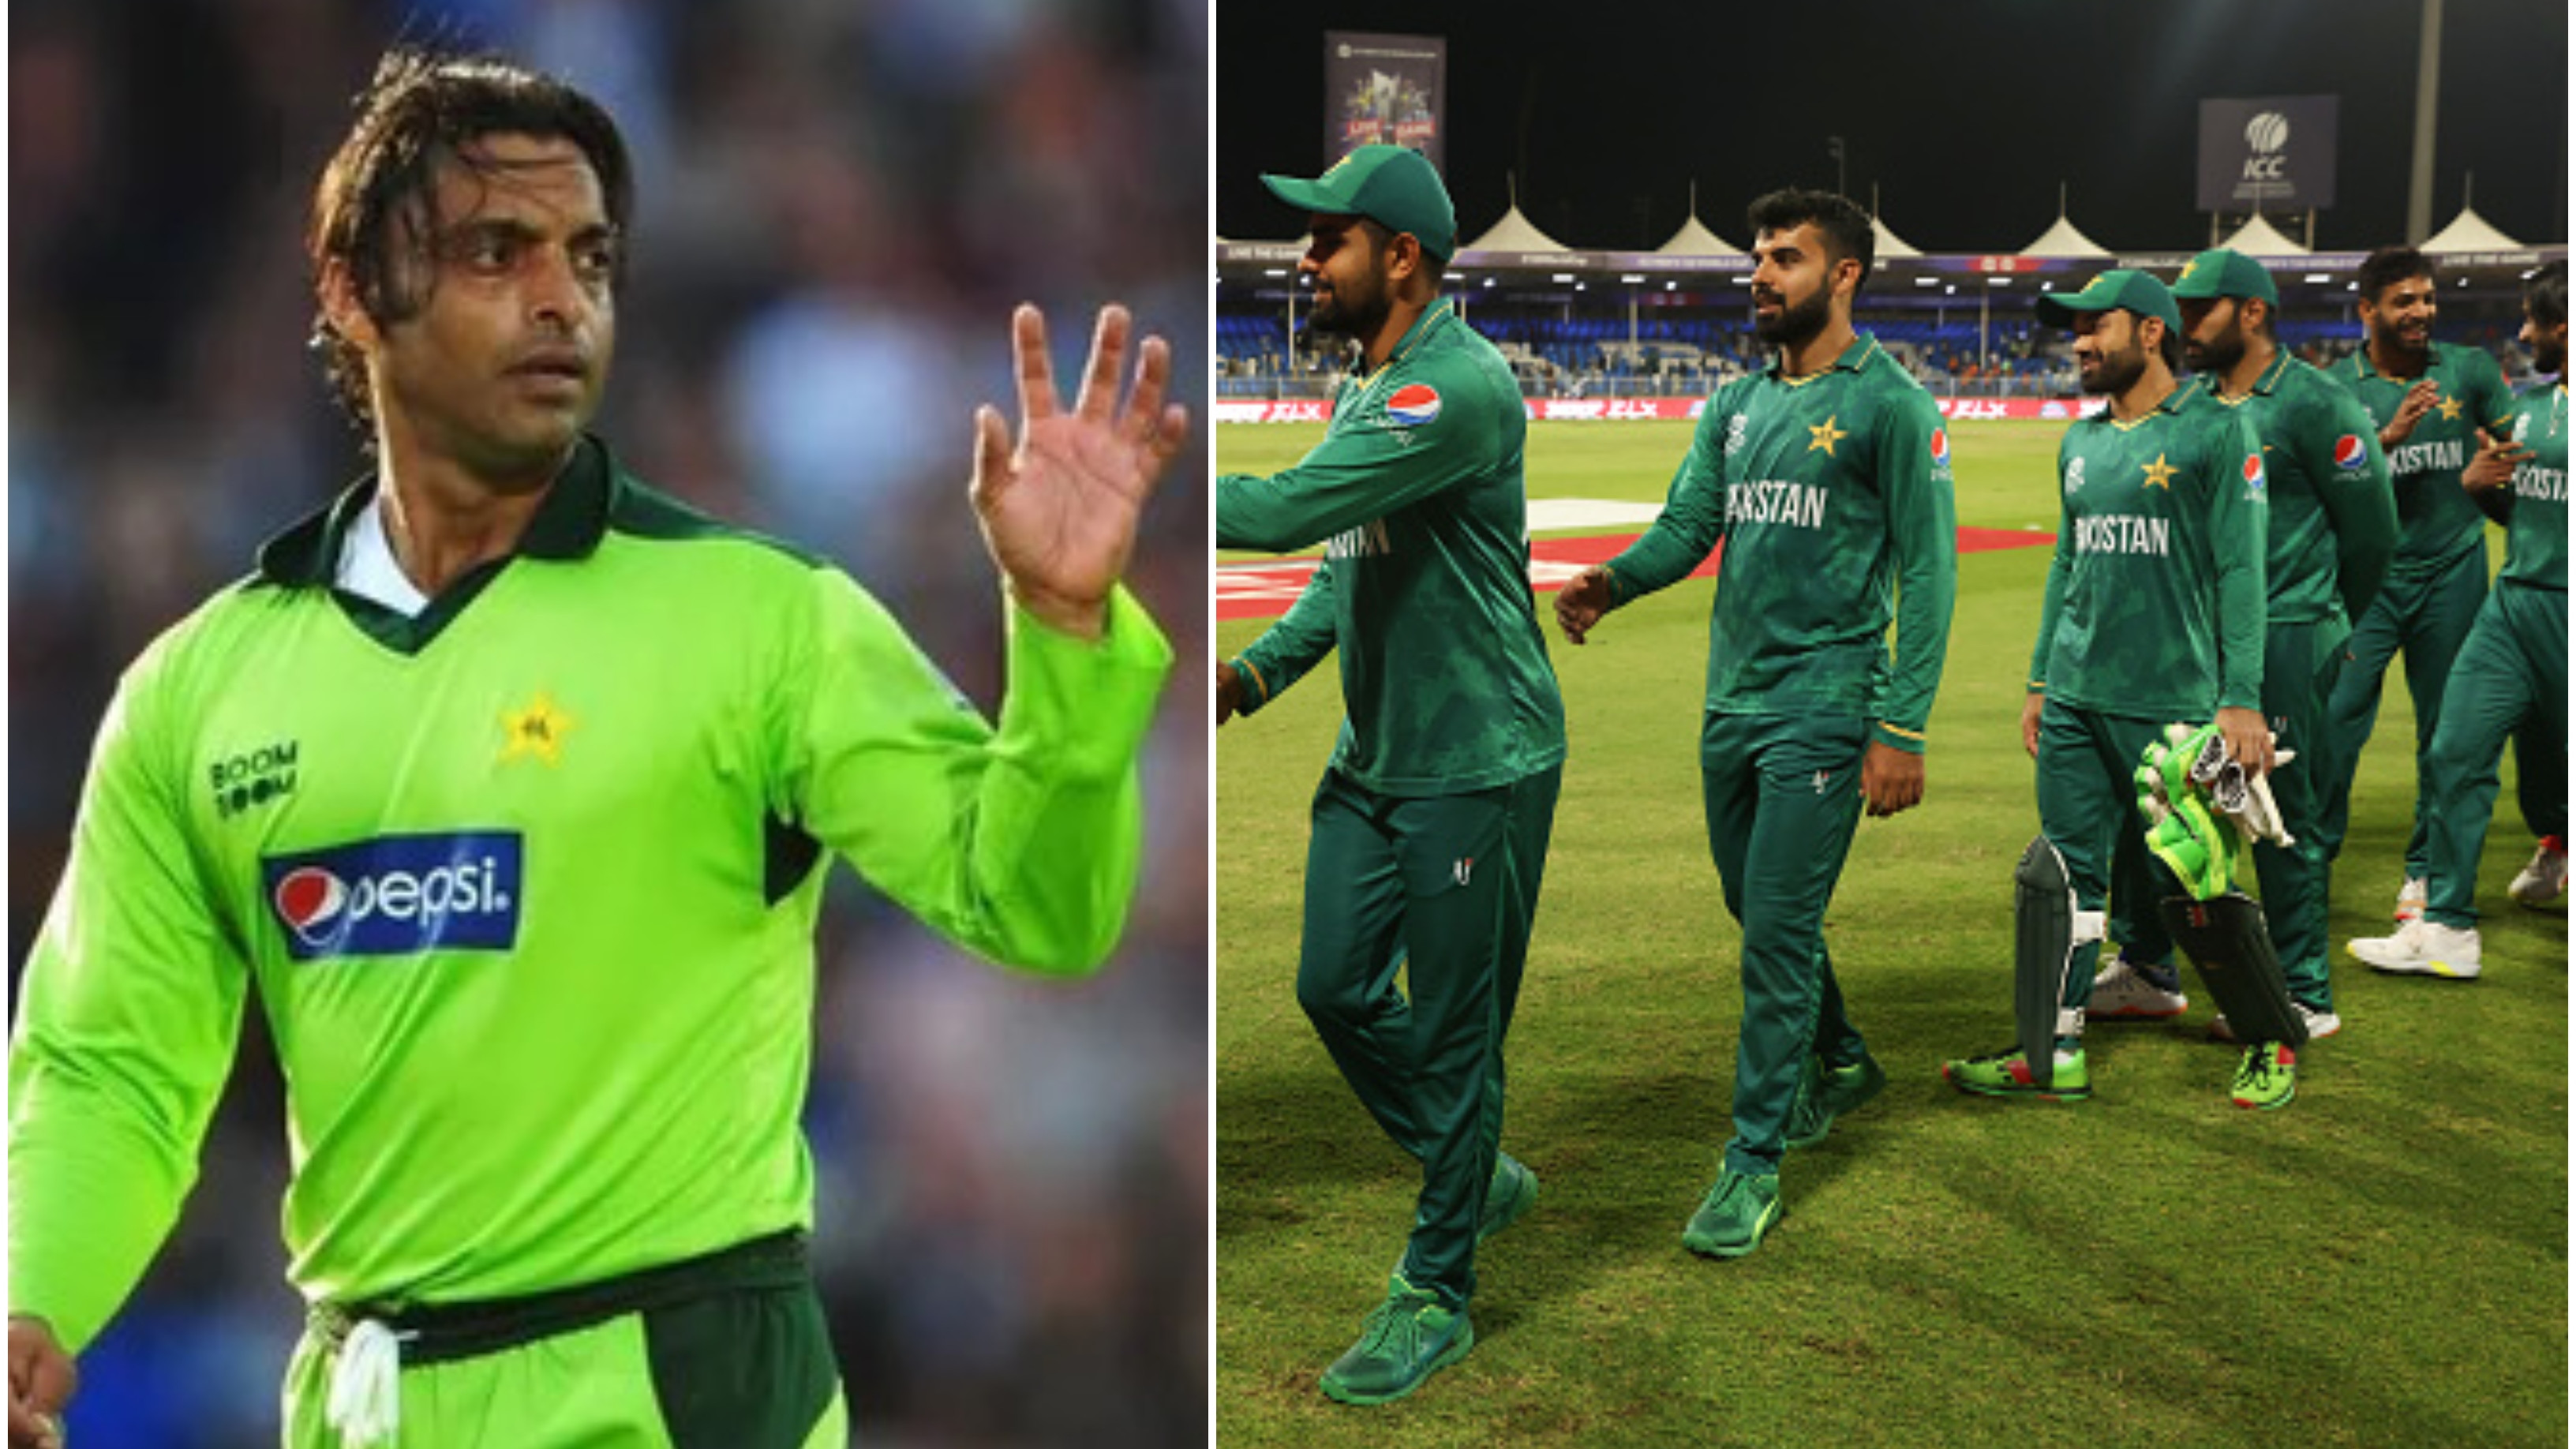 IPL 2022: Shoaib Akhtar names Pakistan batter who could go for 15-20 crores at IPL auctions